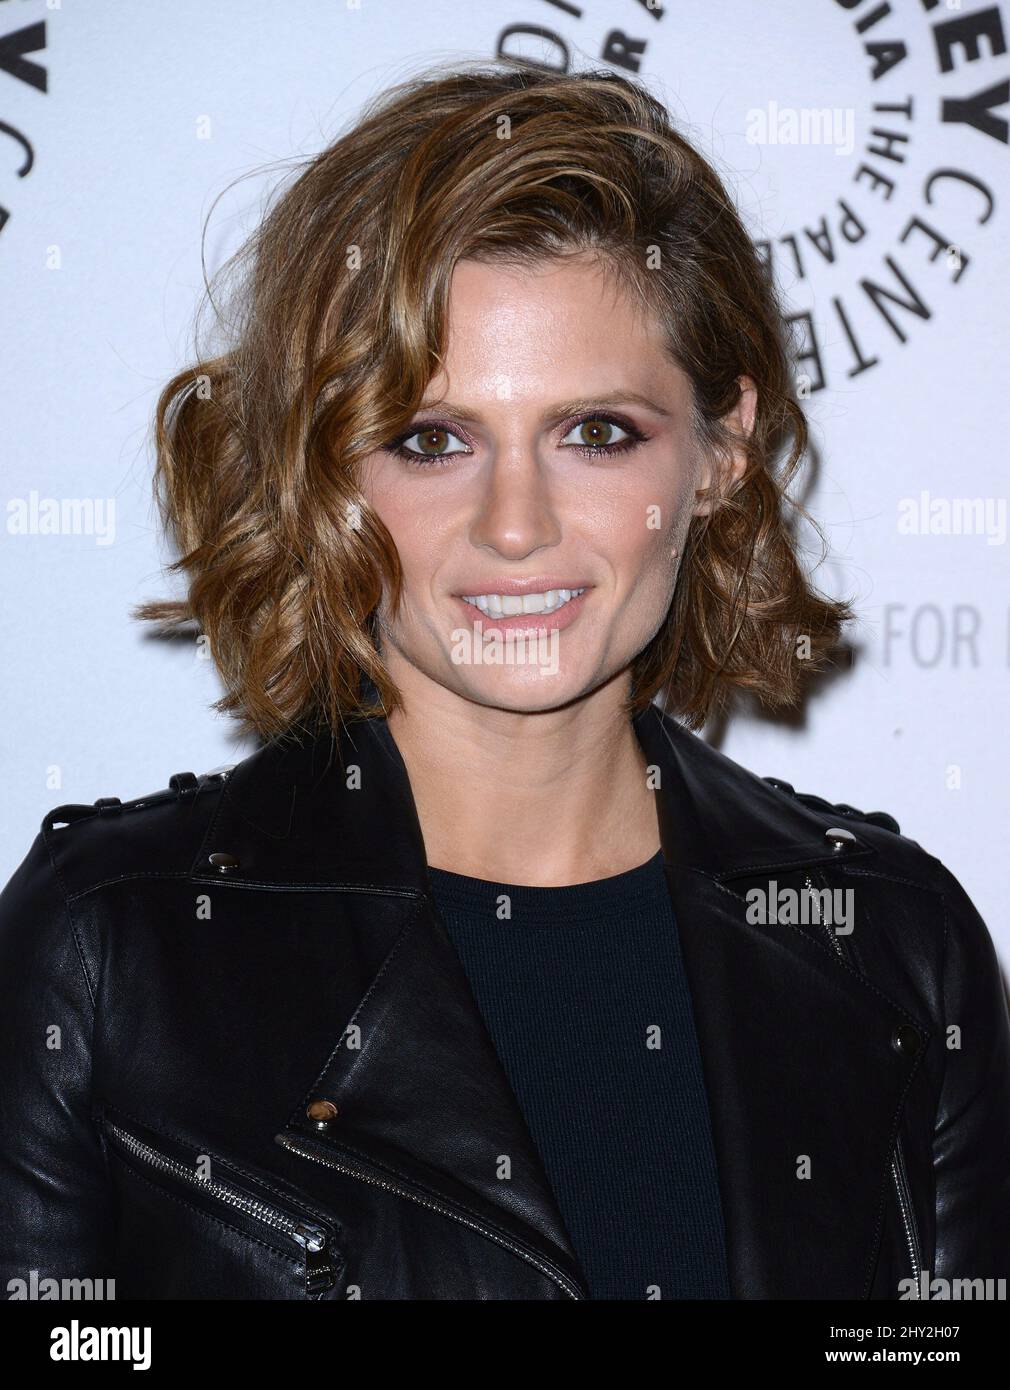 Stana Katic attending an evening with Castle at the Paley Media Centre in Los Angeles, California. Stock Photo